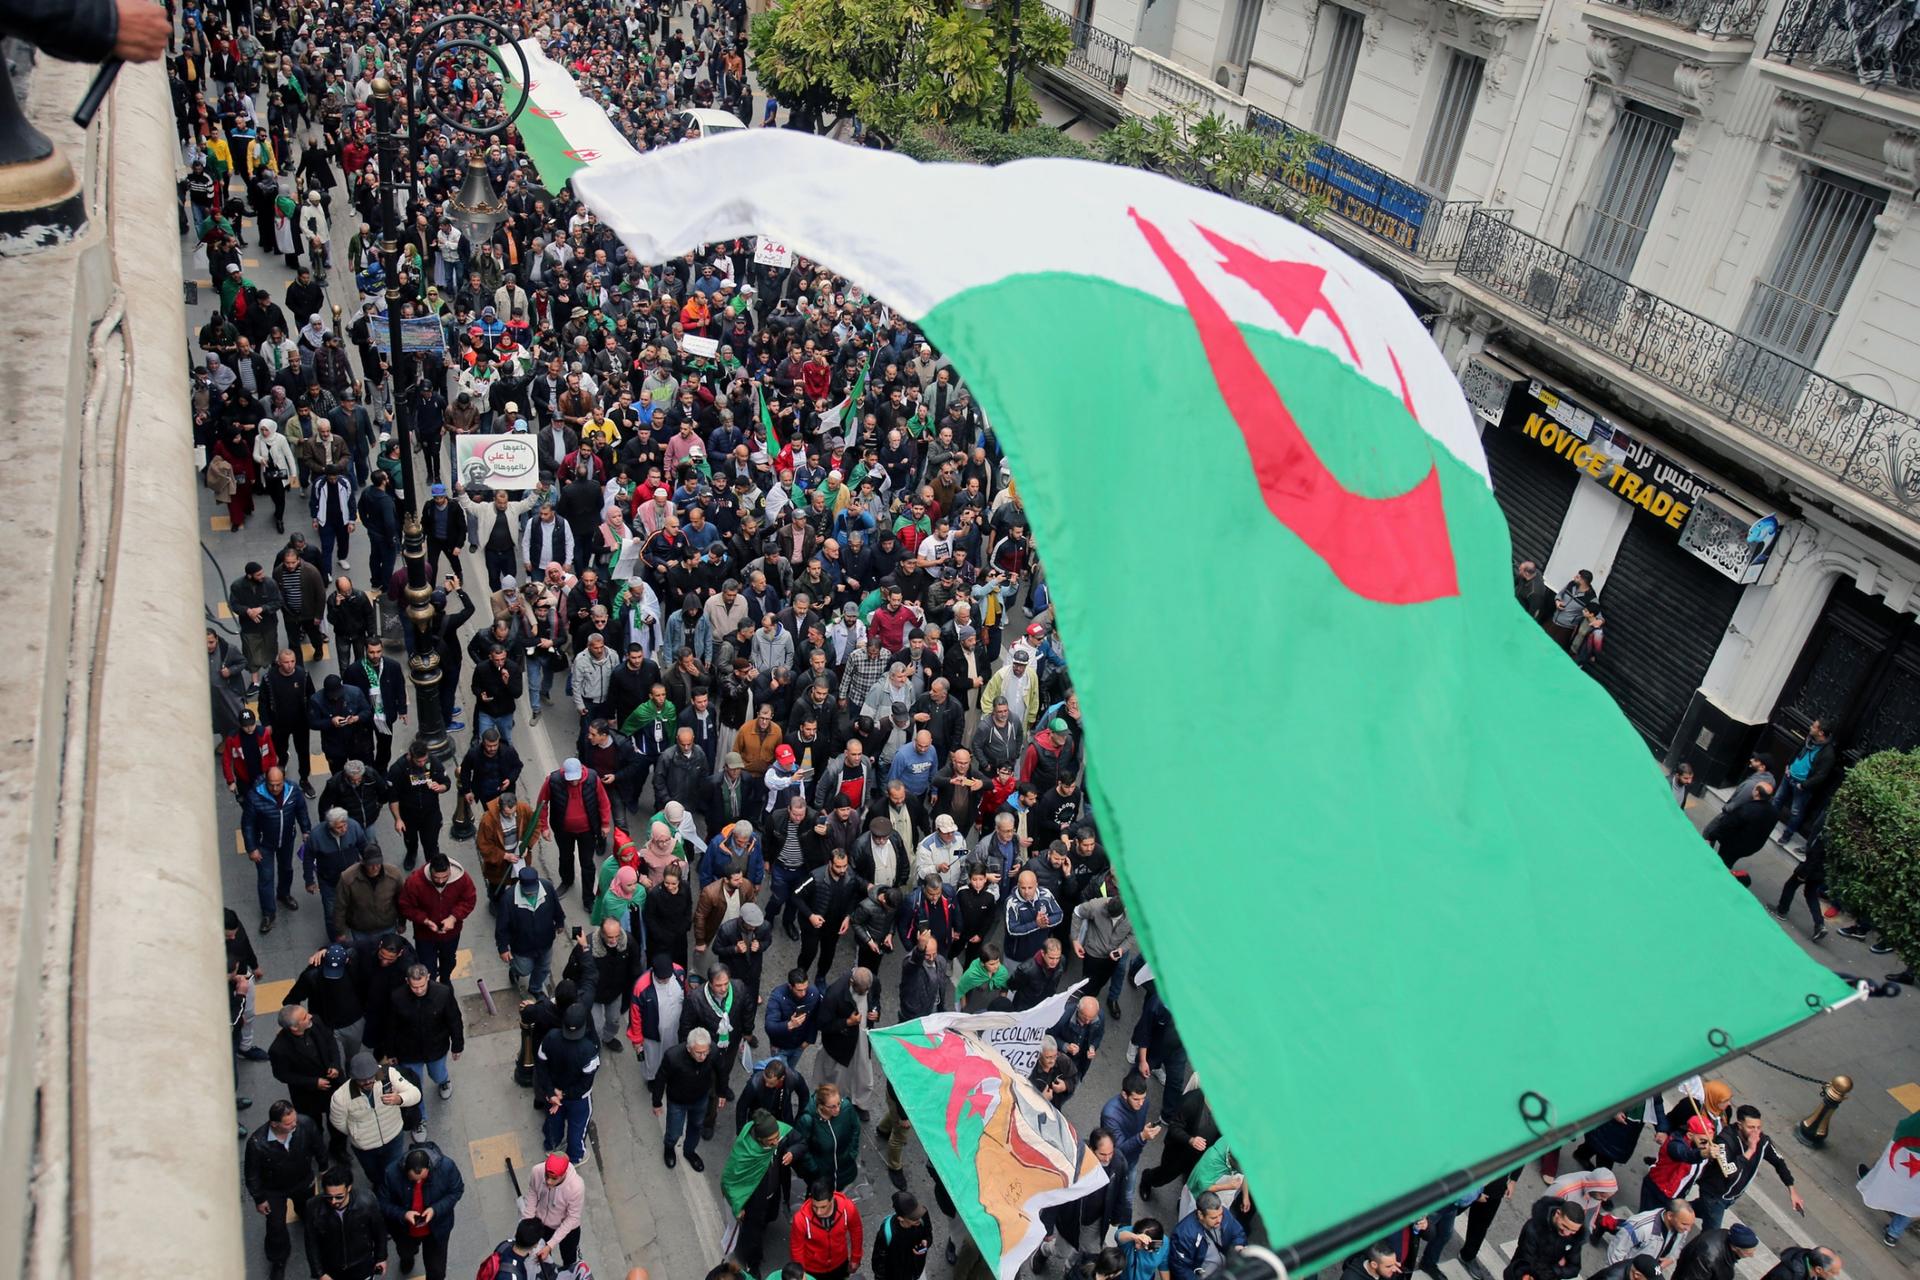 A street is shown filled with people and an Algerian flag is in the nearground.